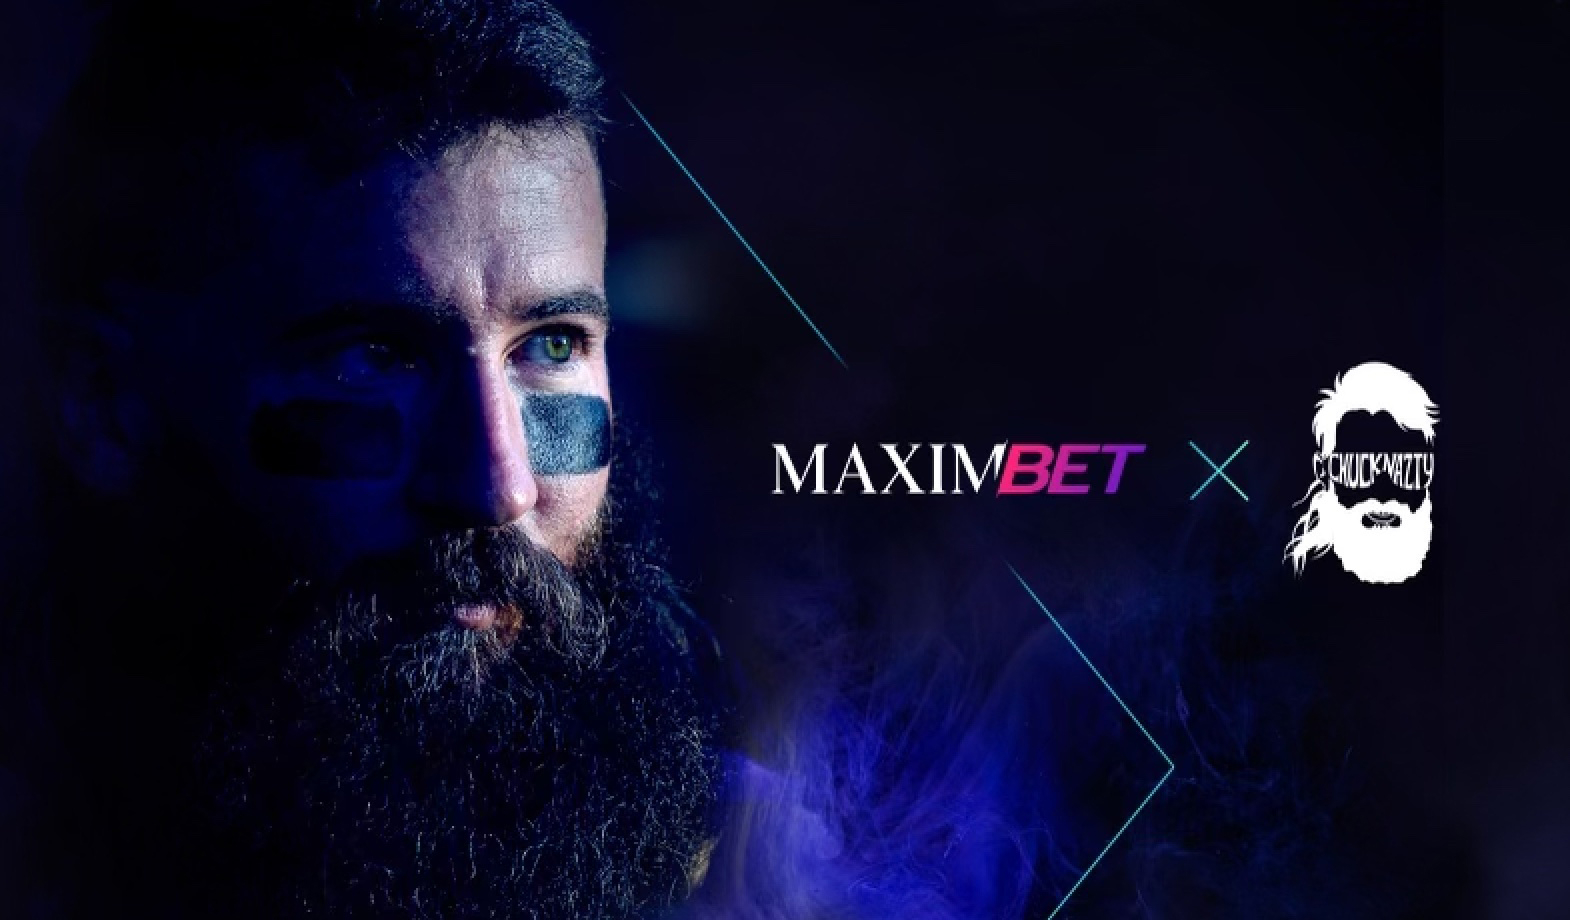 Four-time MLB All-Star Charlie Blackmon signs up as MaximBet